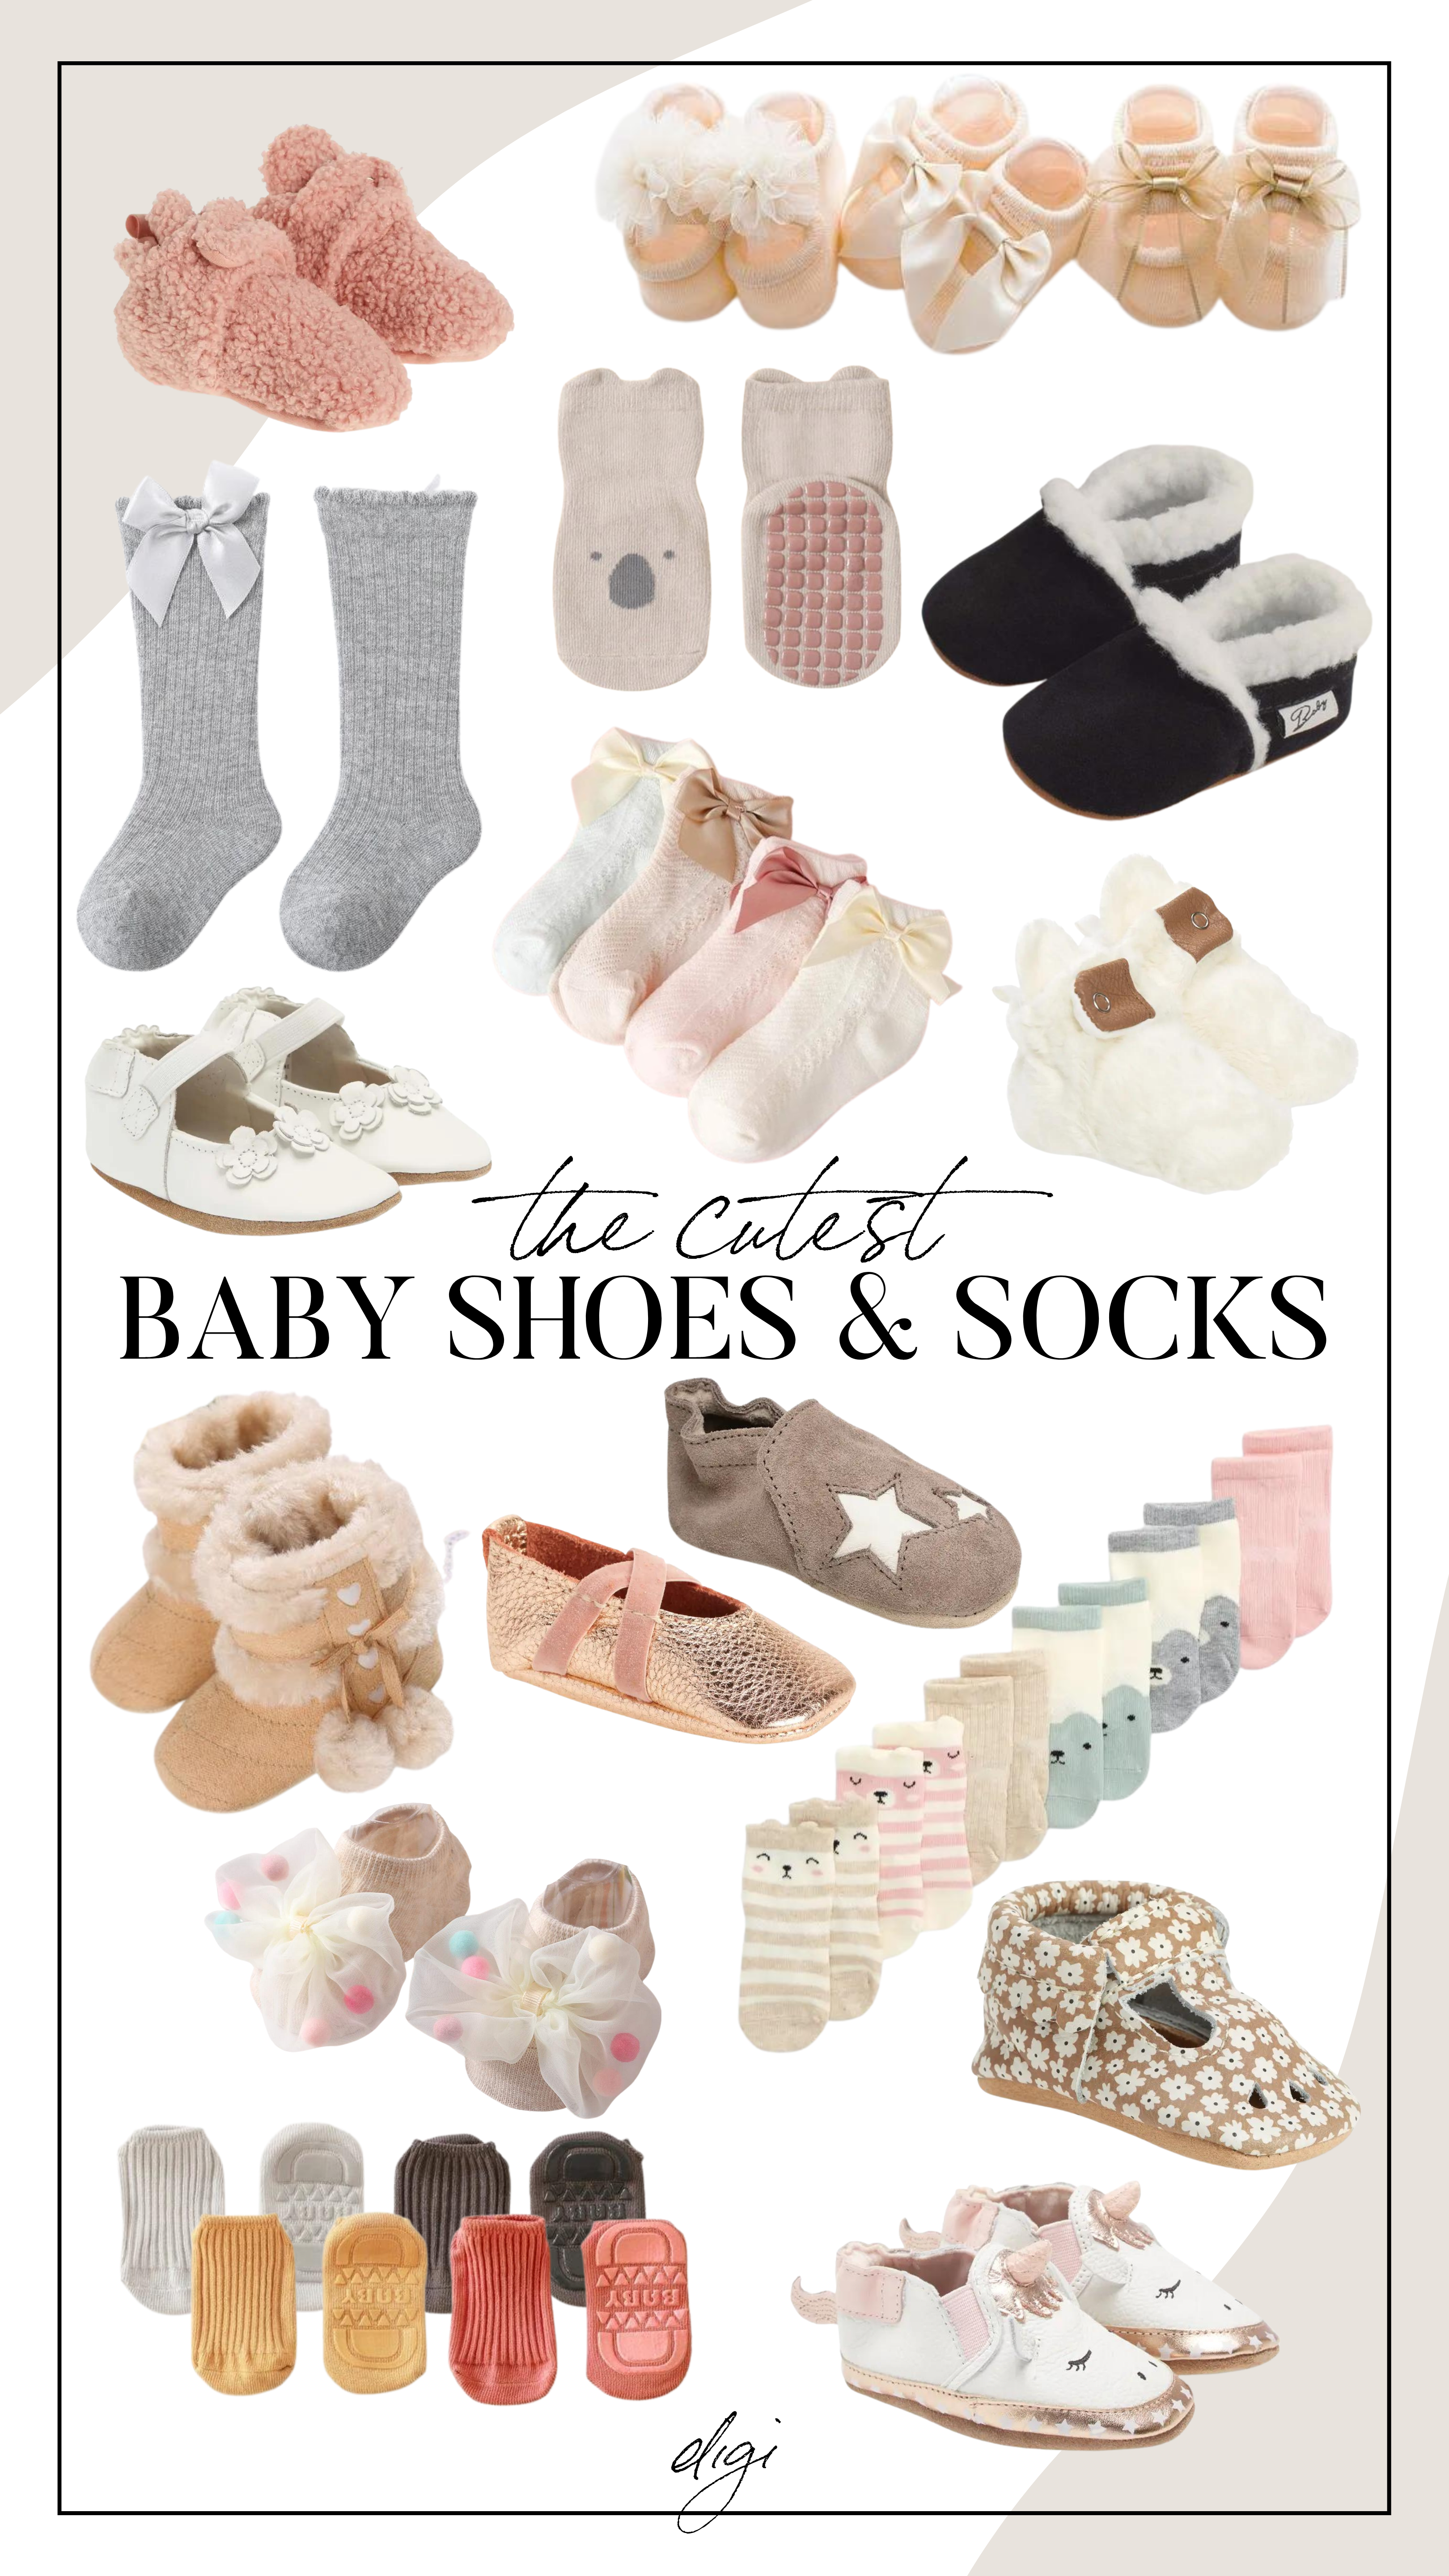 Cute baby shoes and socks